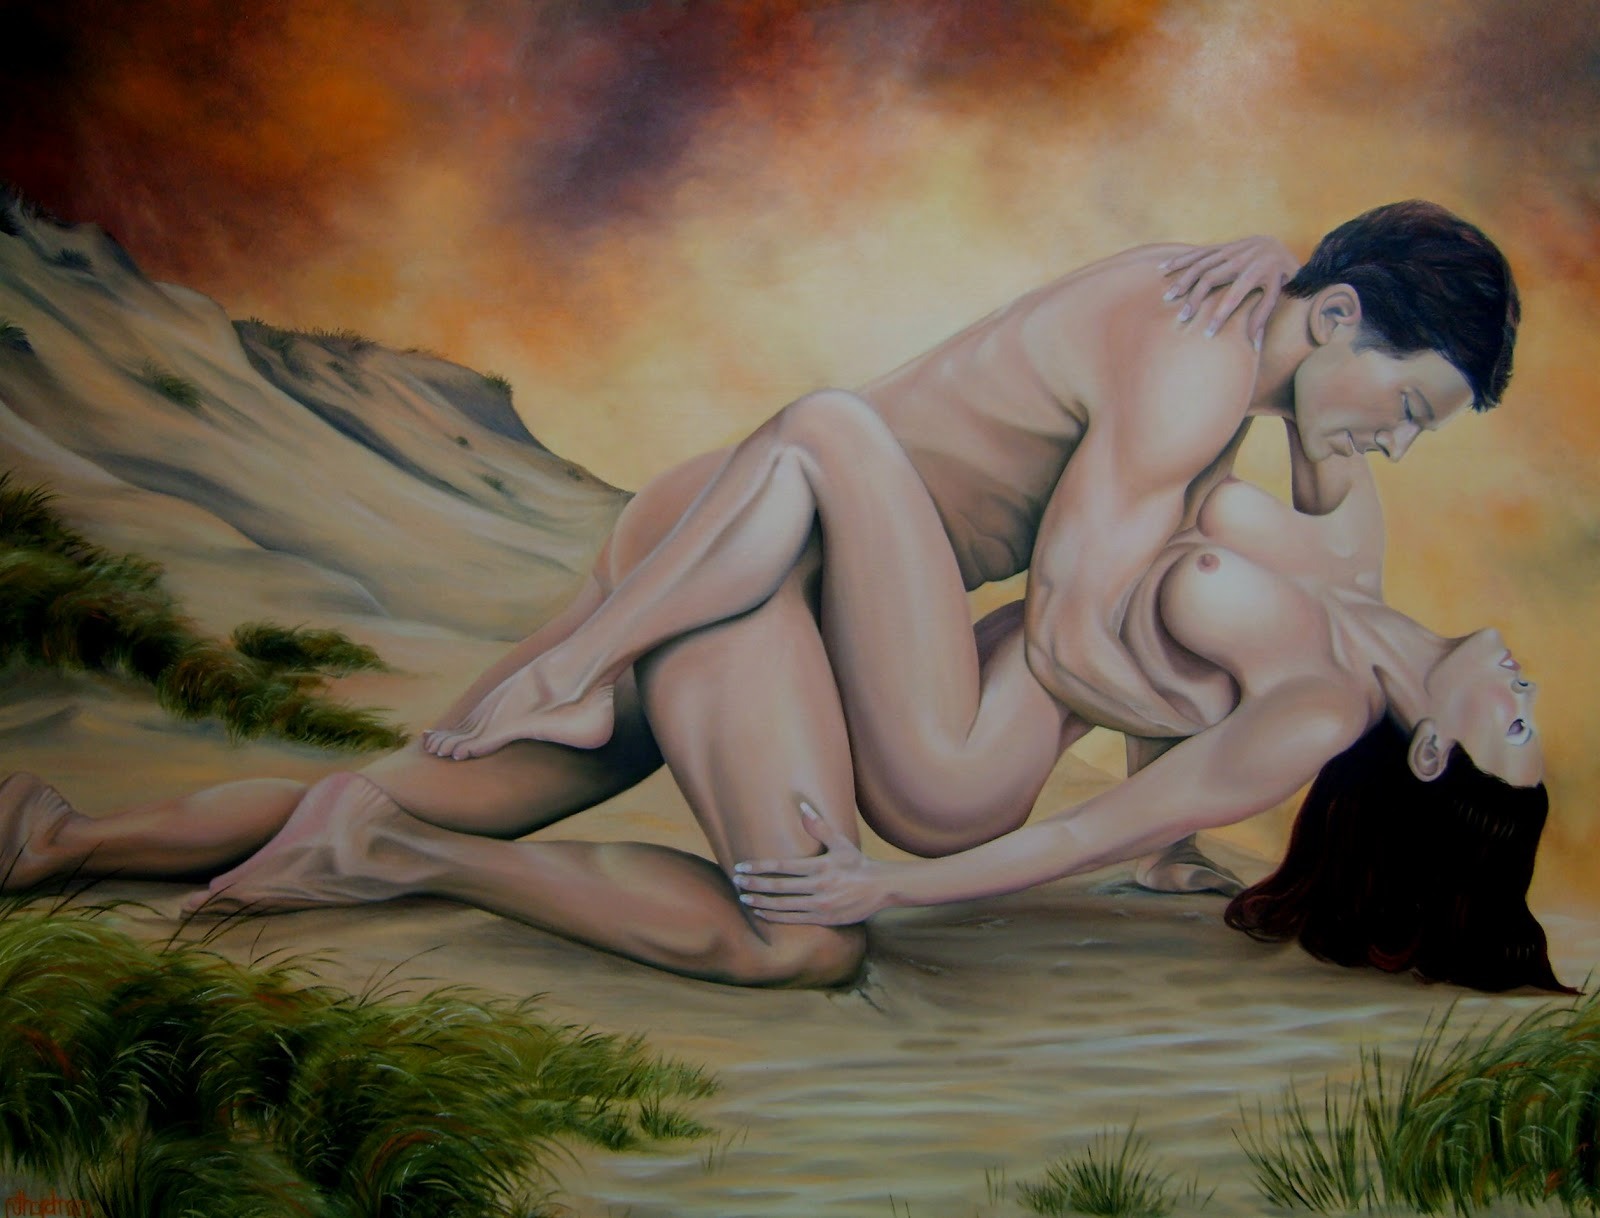 From Erotic Poetry to Provocative Paintings: The Many Languages of Sexual Art